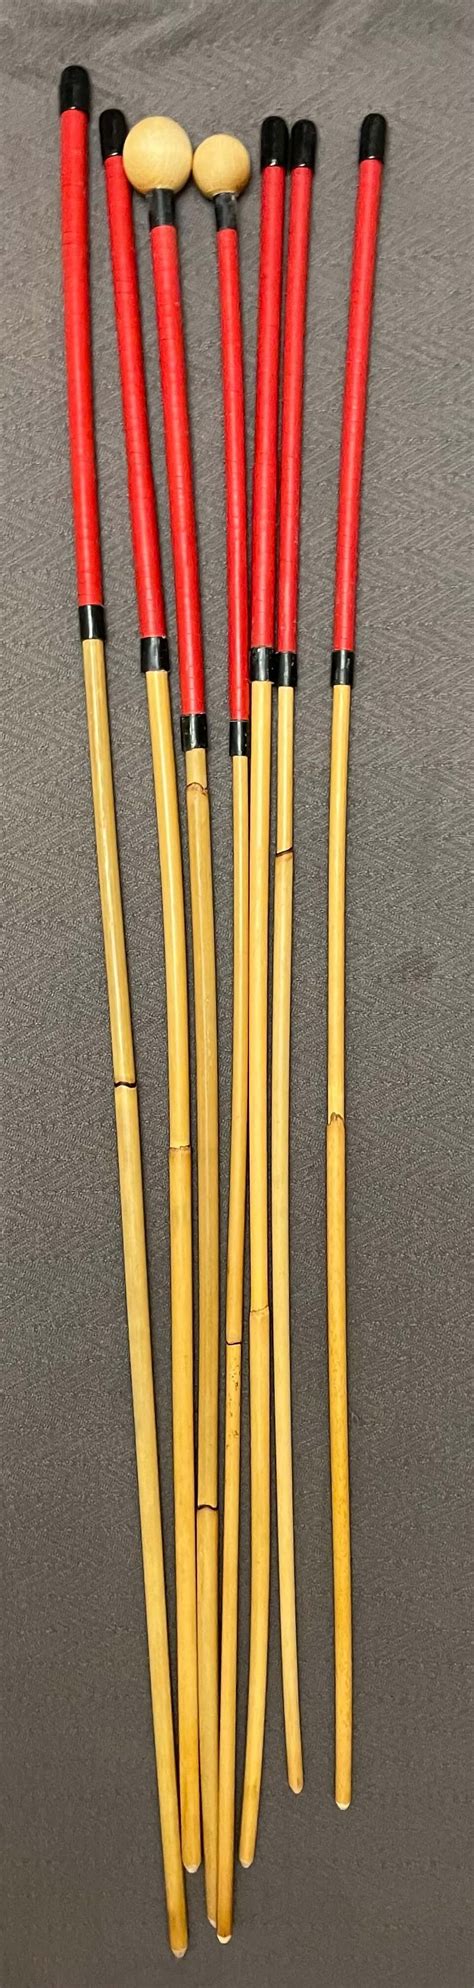 Set Of 7 Natural Dragon Rattan Punishment Canes School Canes Whipp